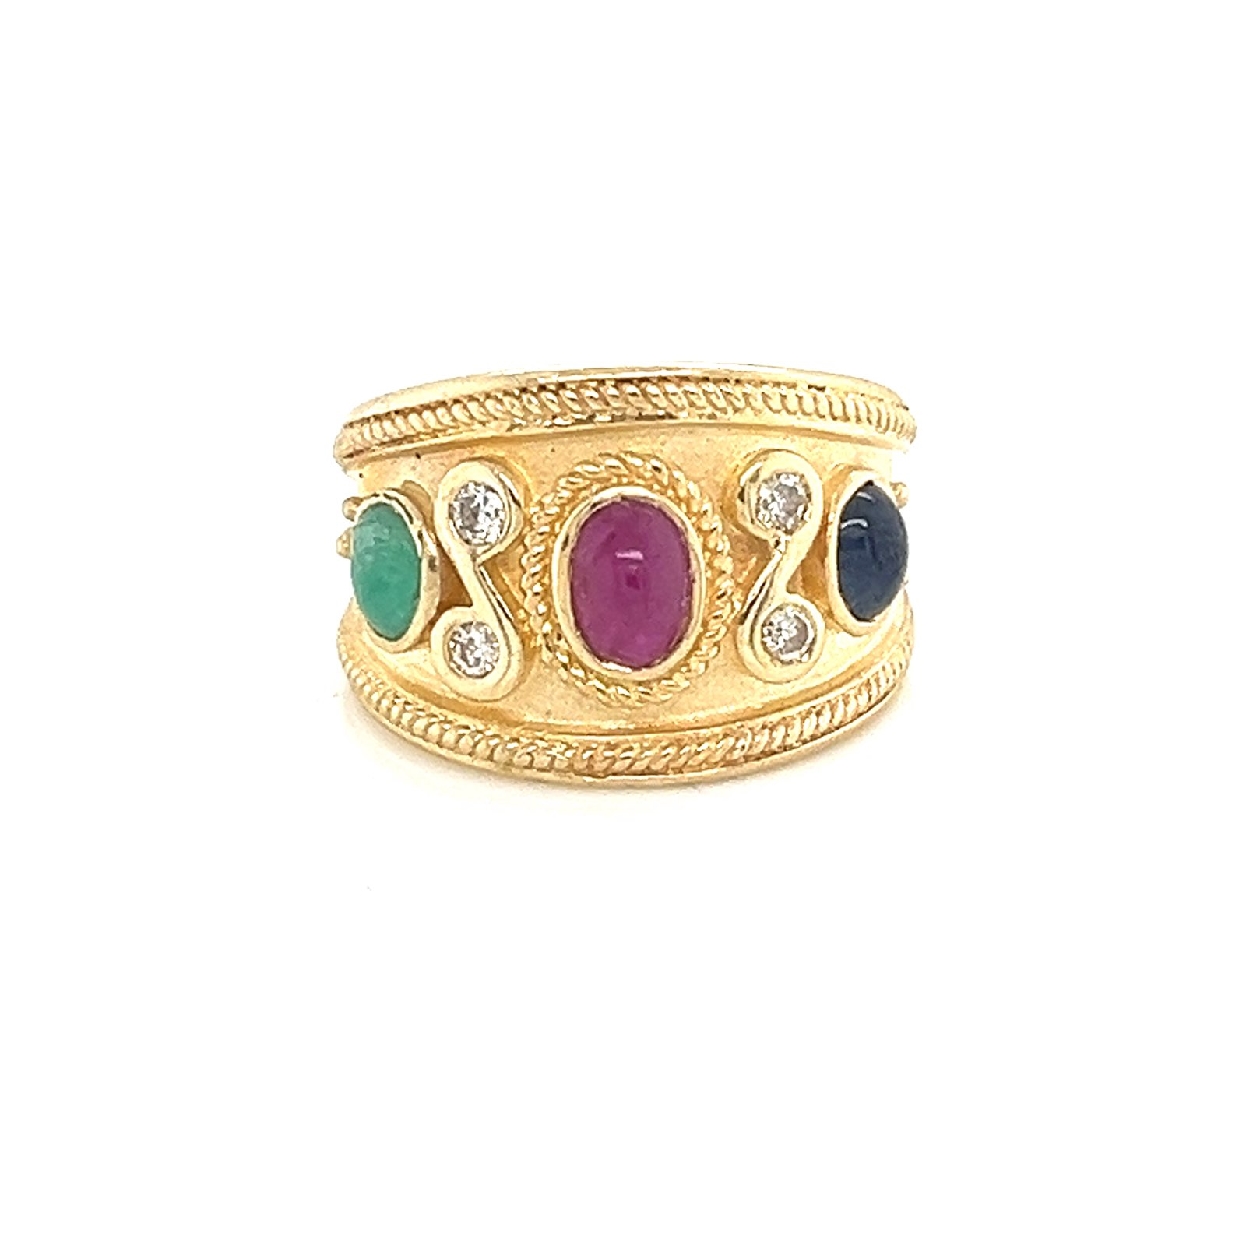 14K Yellow Gold Ring with Sapphire; Ruby; Emerald Stones and Diamonds 

Size 7.5